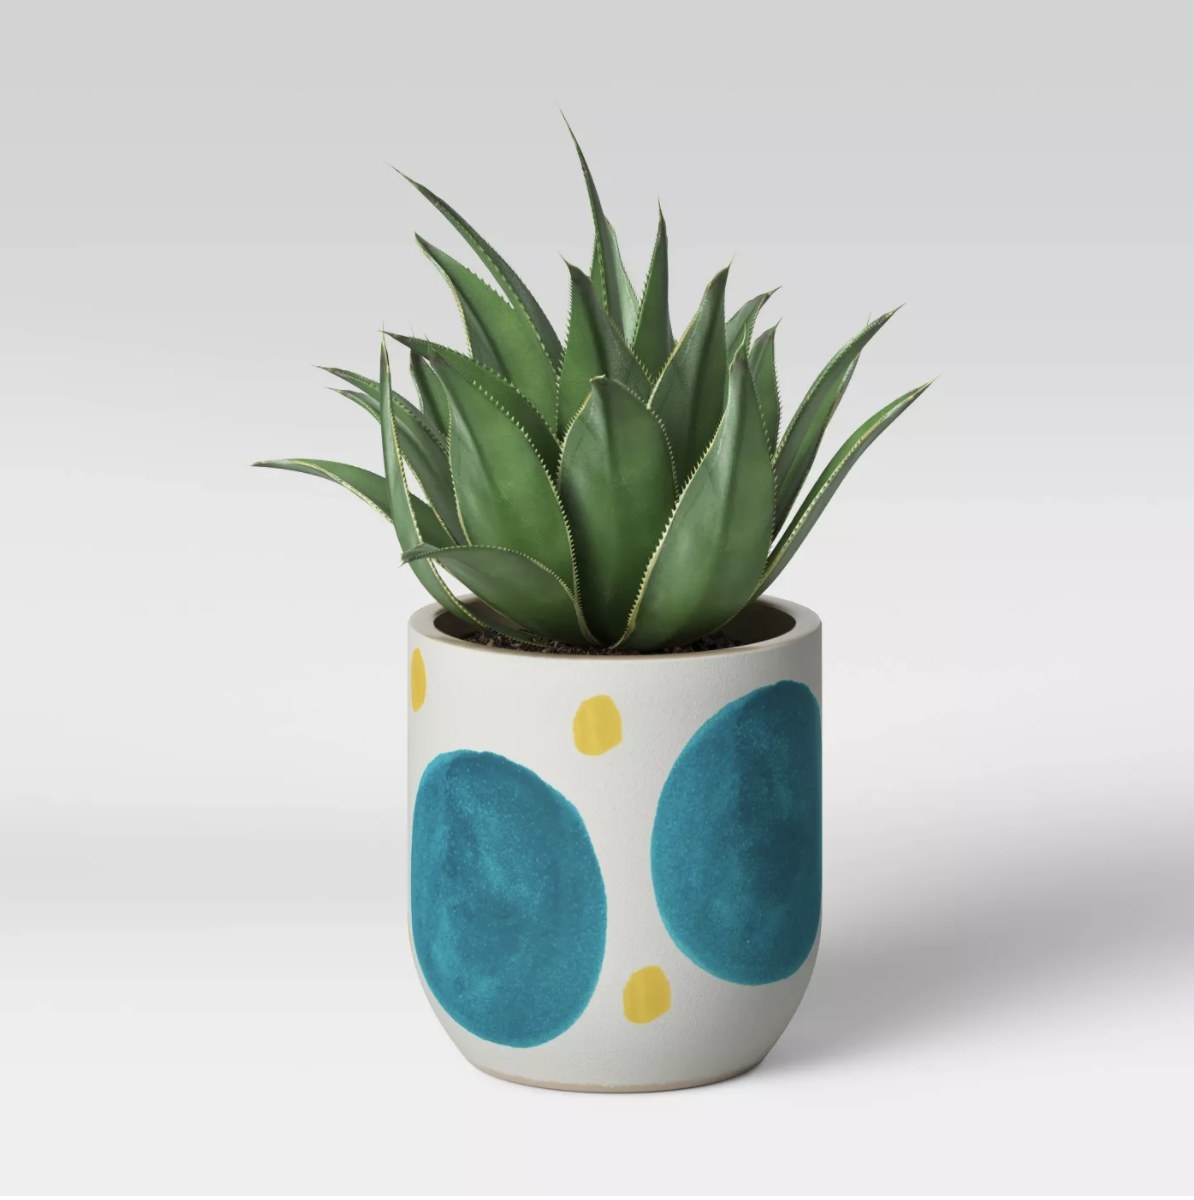 A white ceramic pot with large blue ovals and small yellow circles holding a short green plant